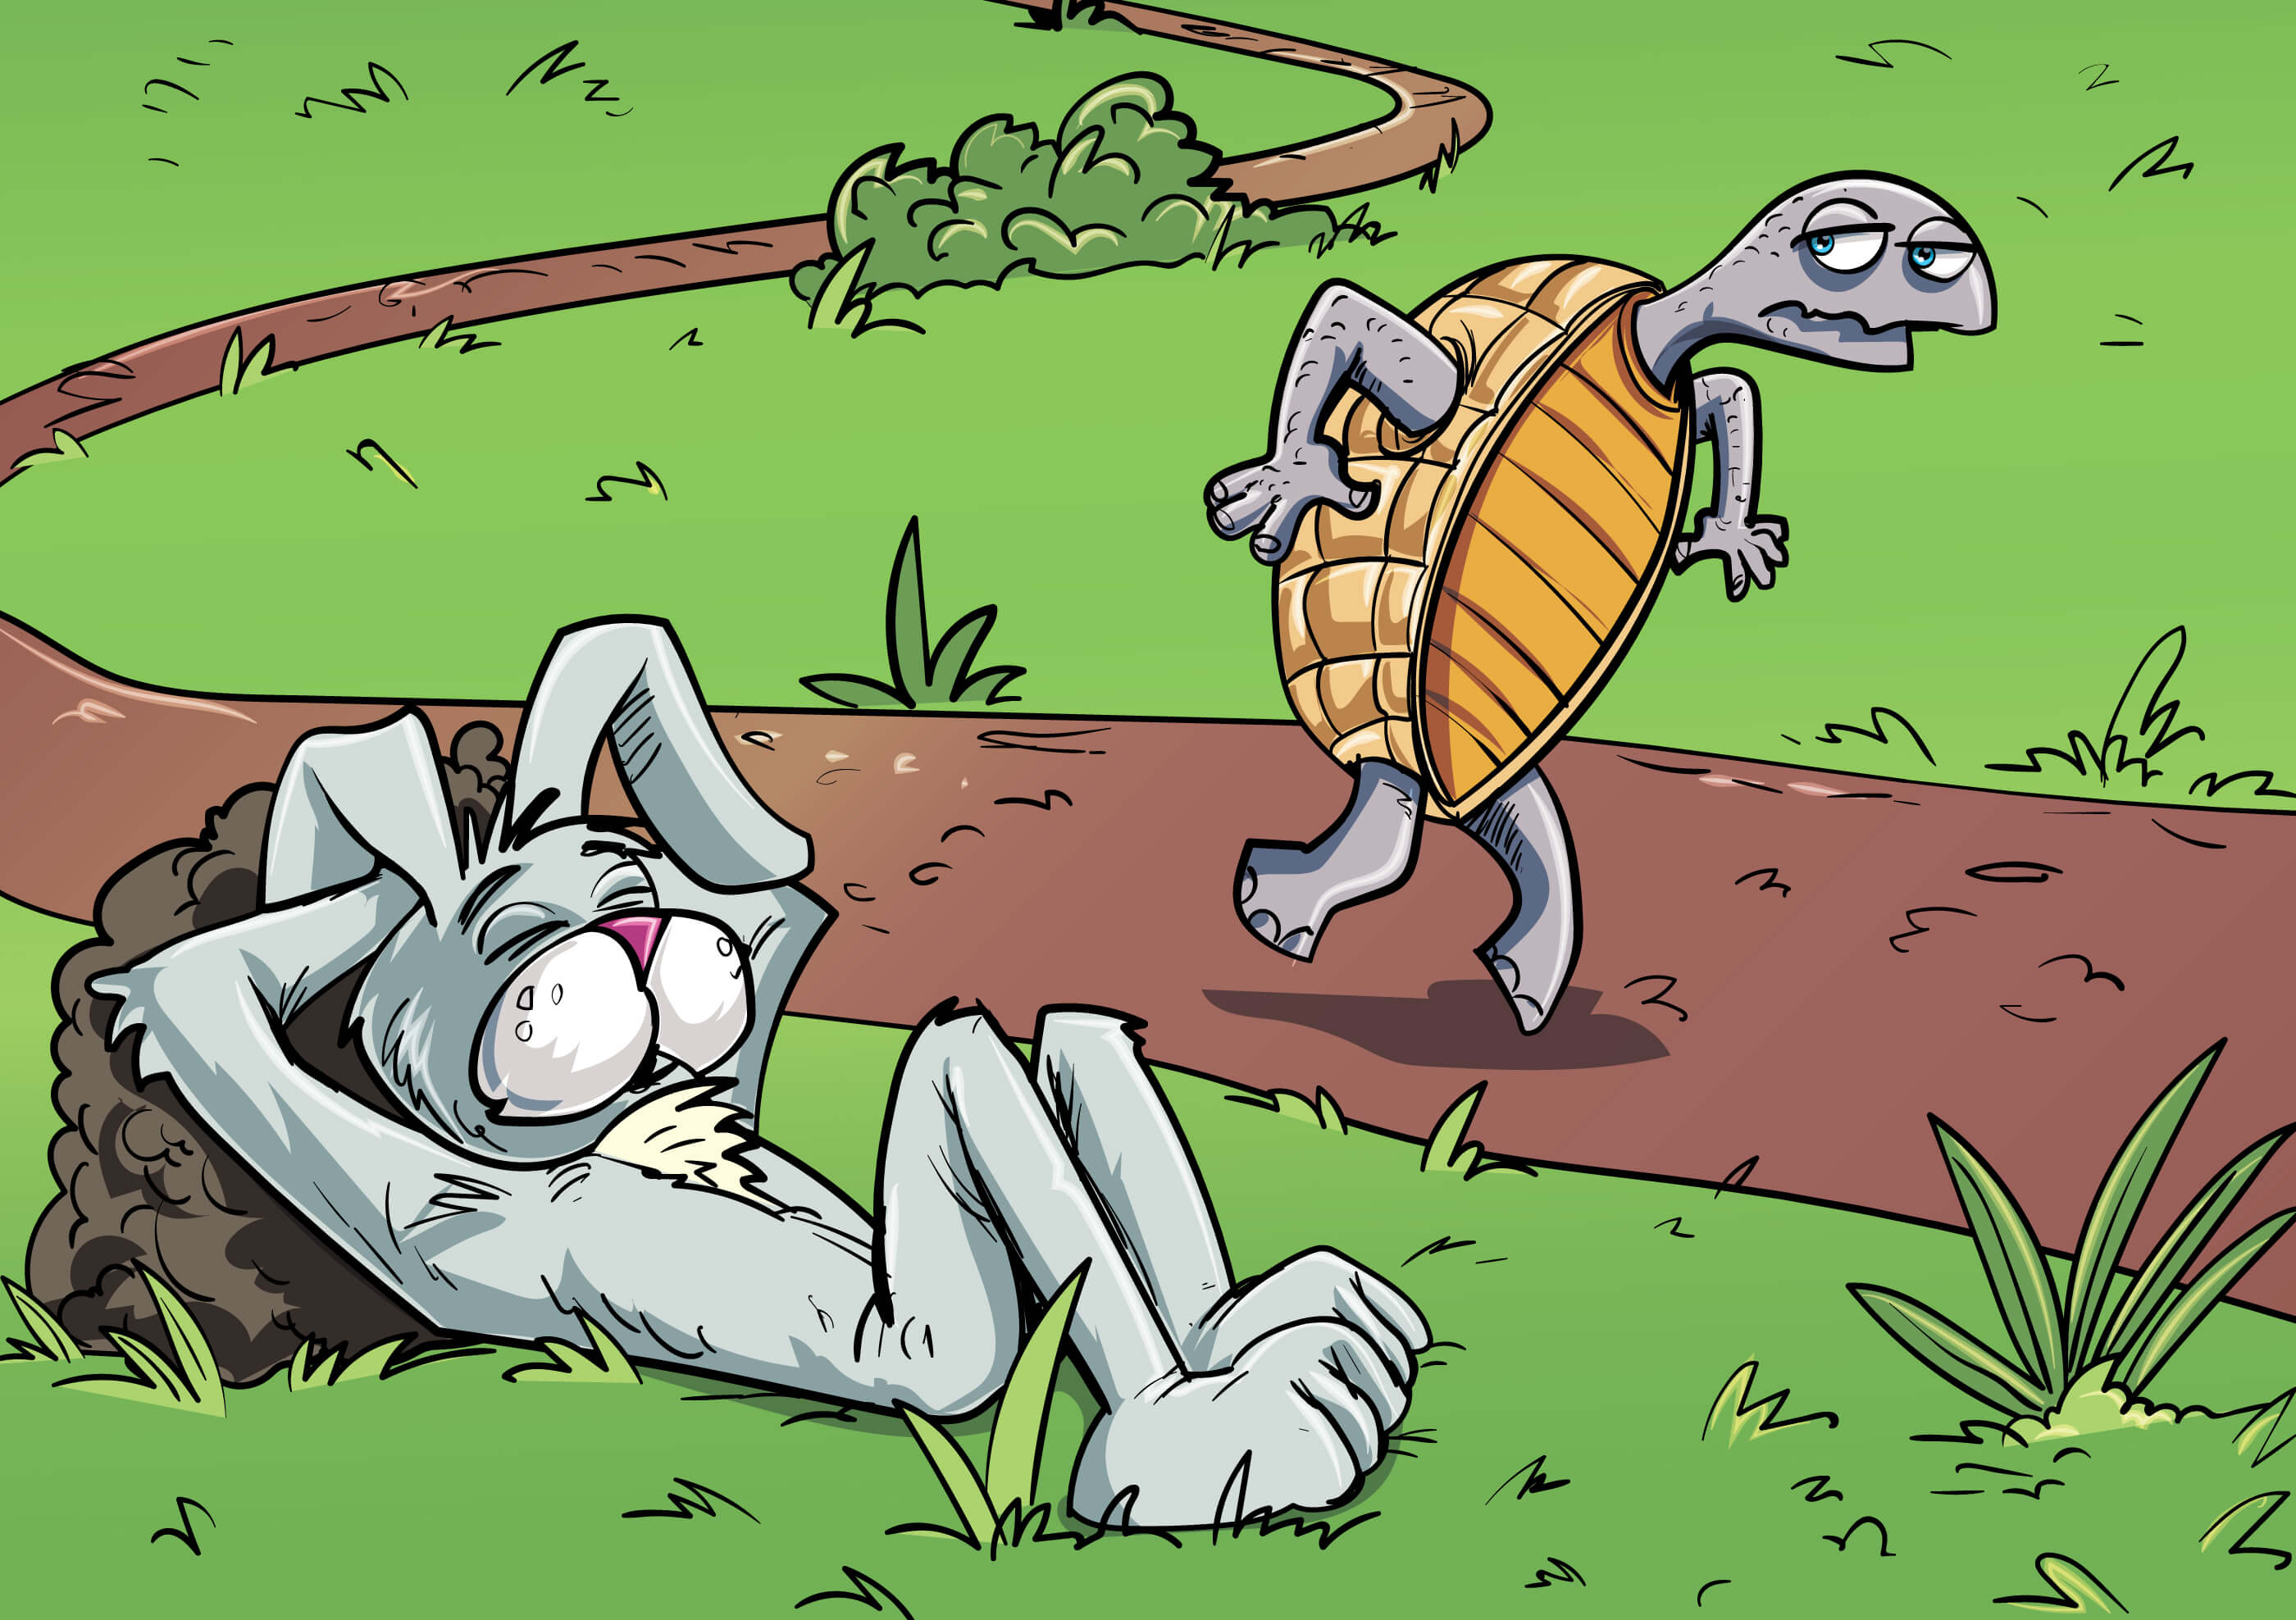 A cartoon drawing of a scene from the Tuortoise and the Hare.